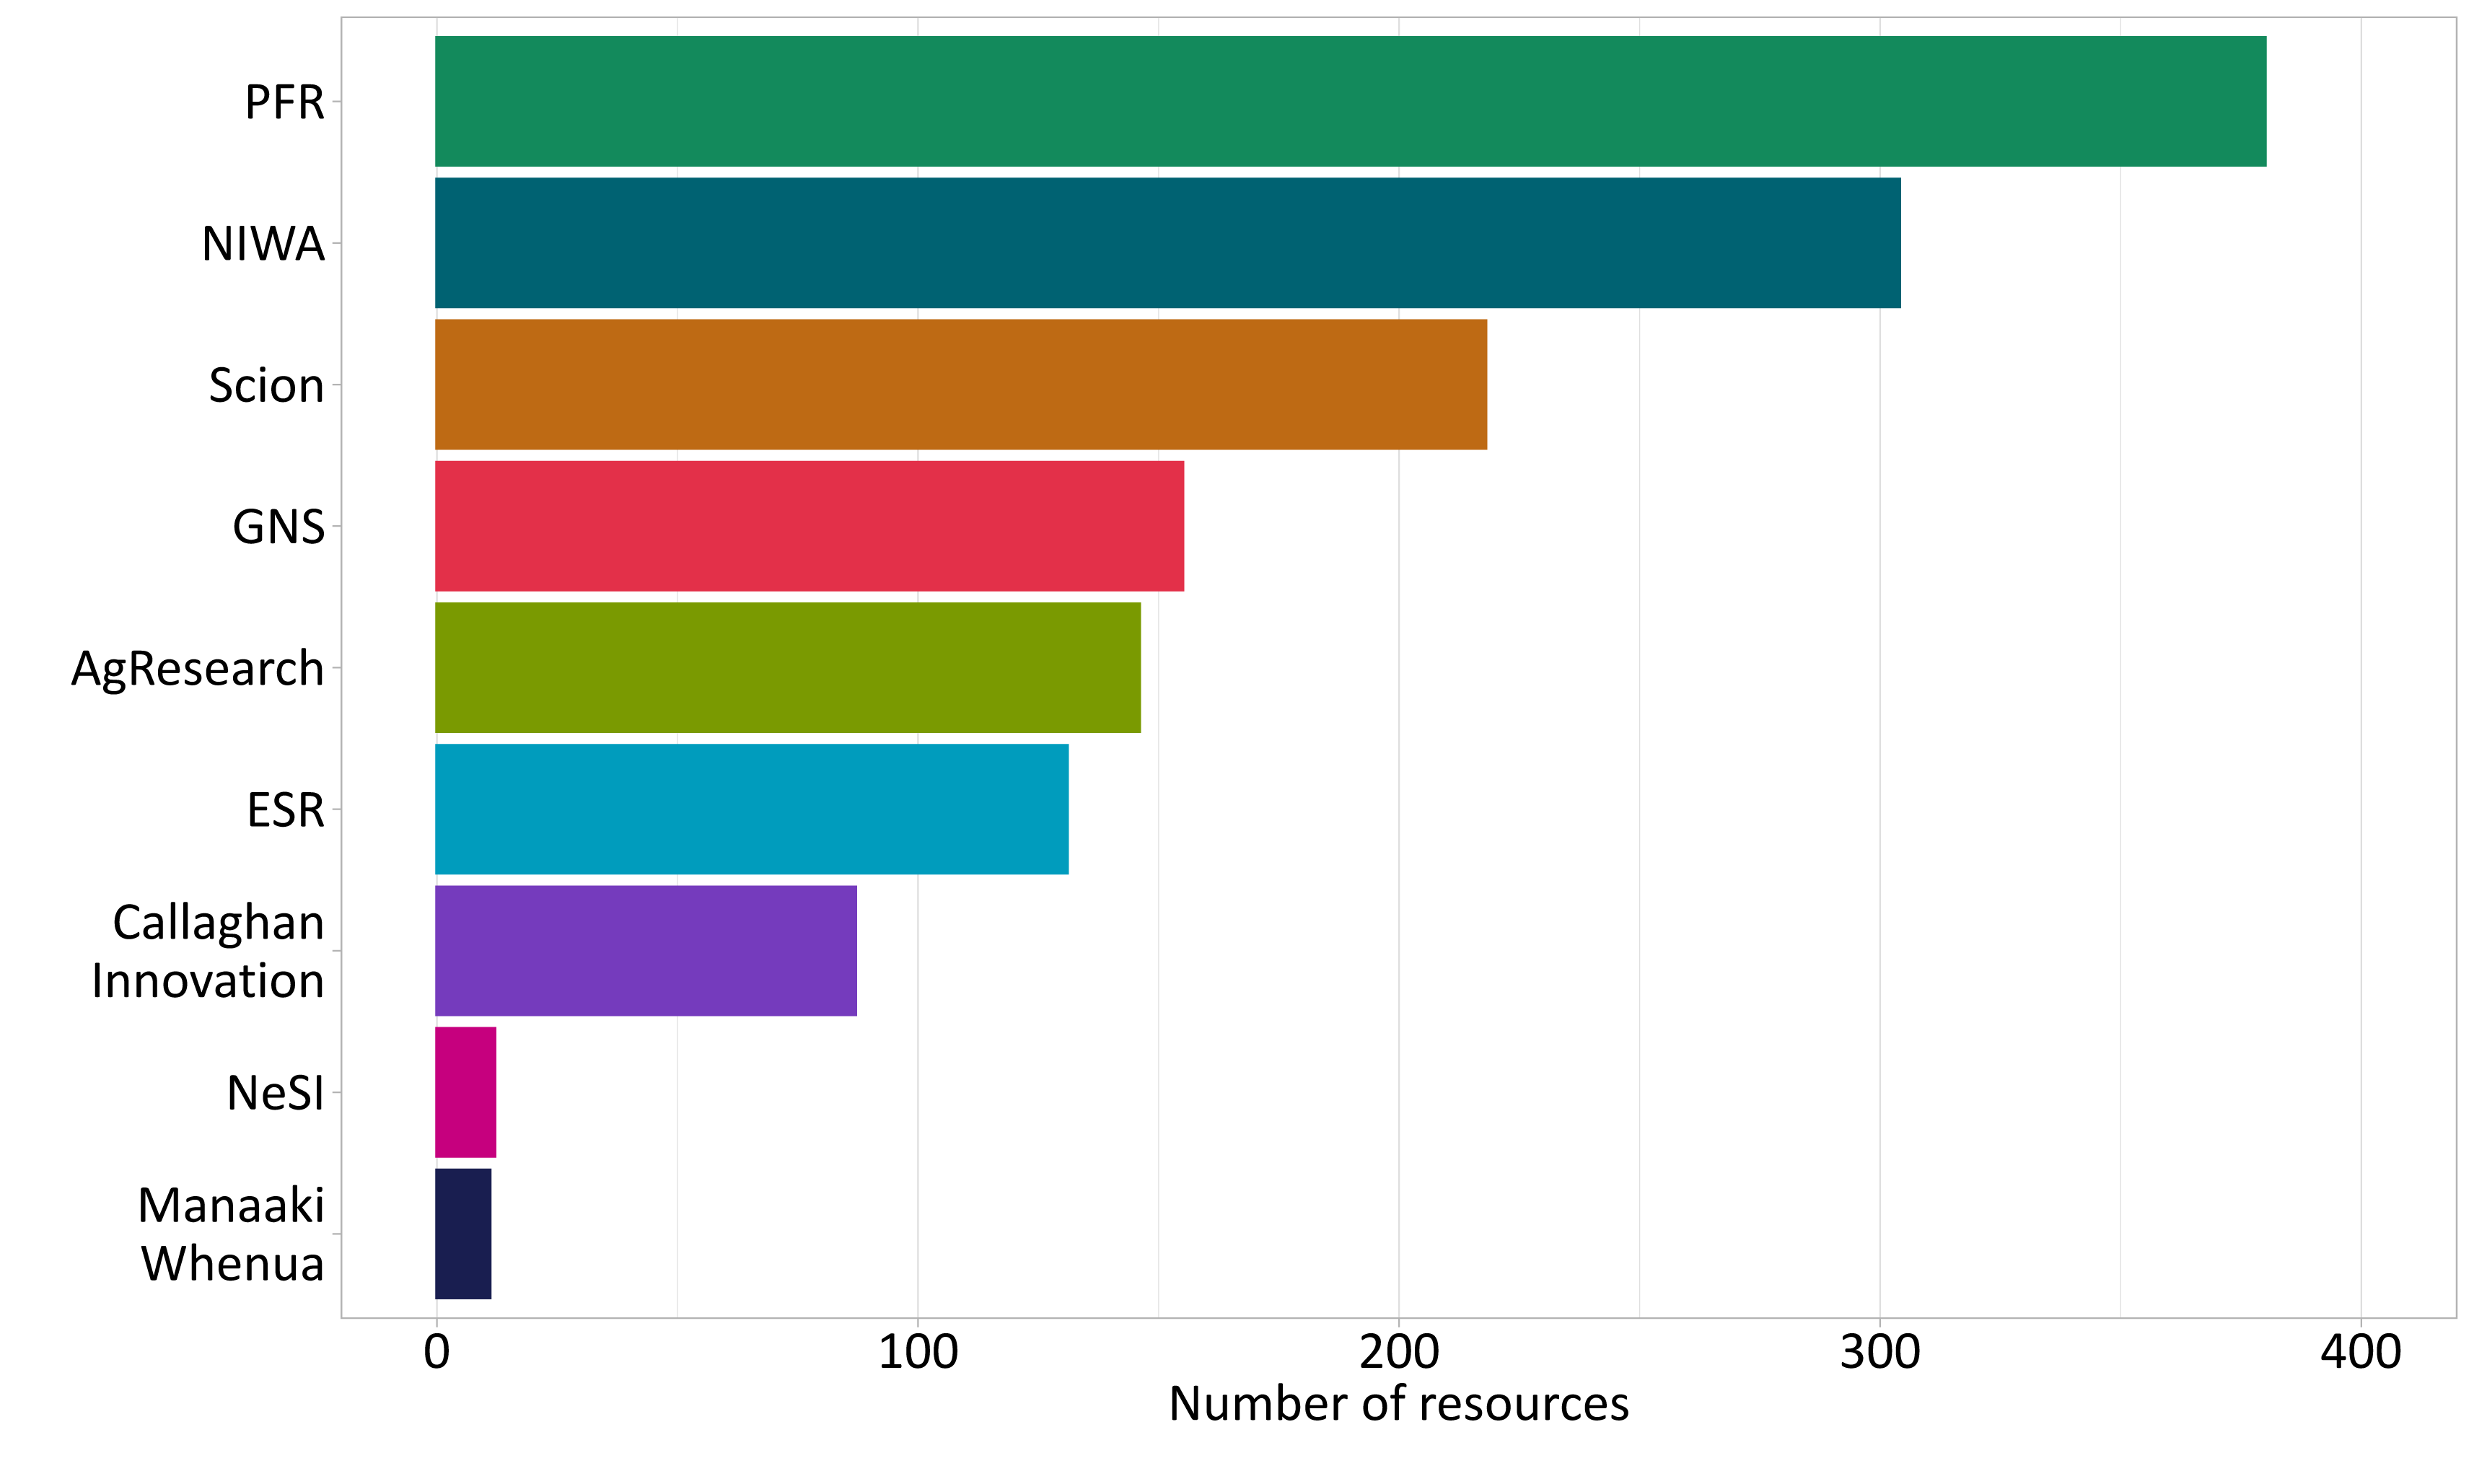 figure4 number of resources reported by each institution